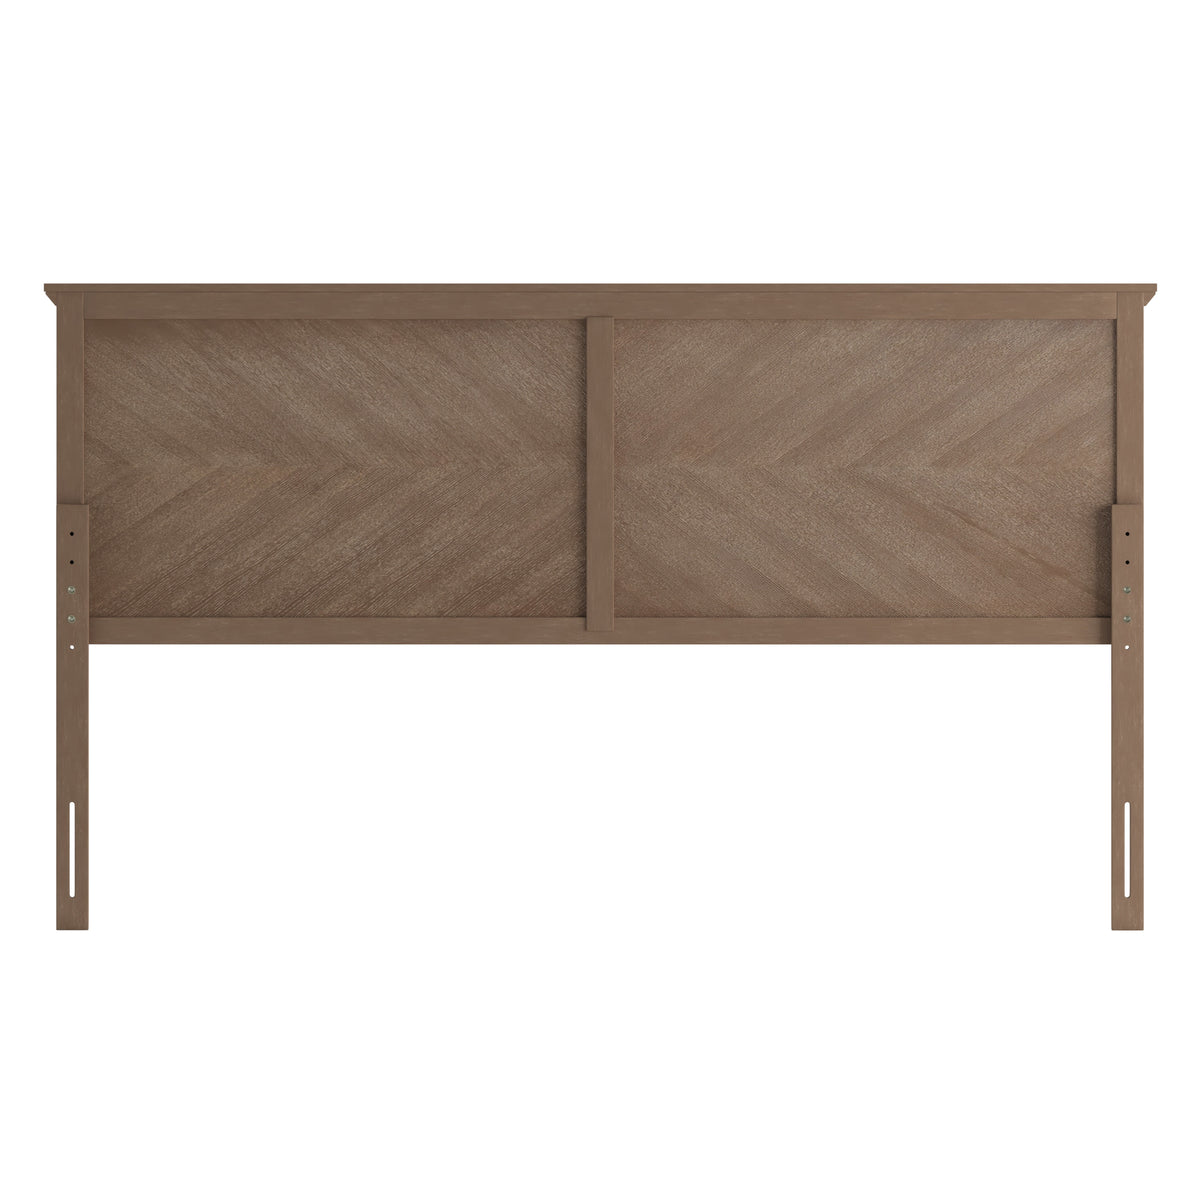 Light Brown,King |#| Contemporary King Size Herring Bone Wooden Headboard Only in Light Brown